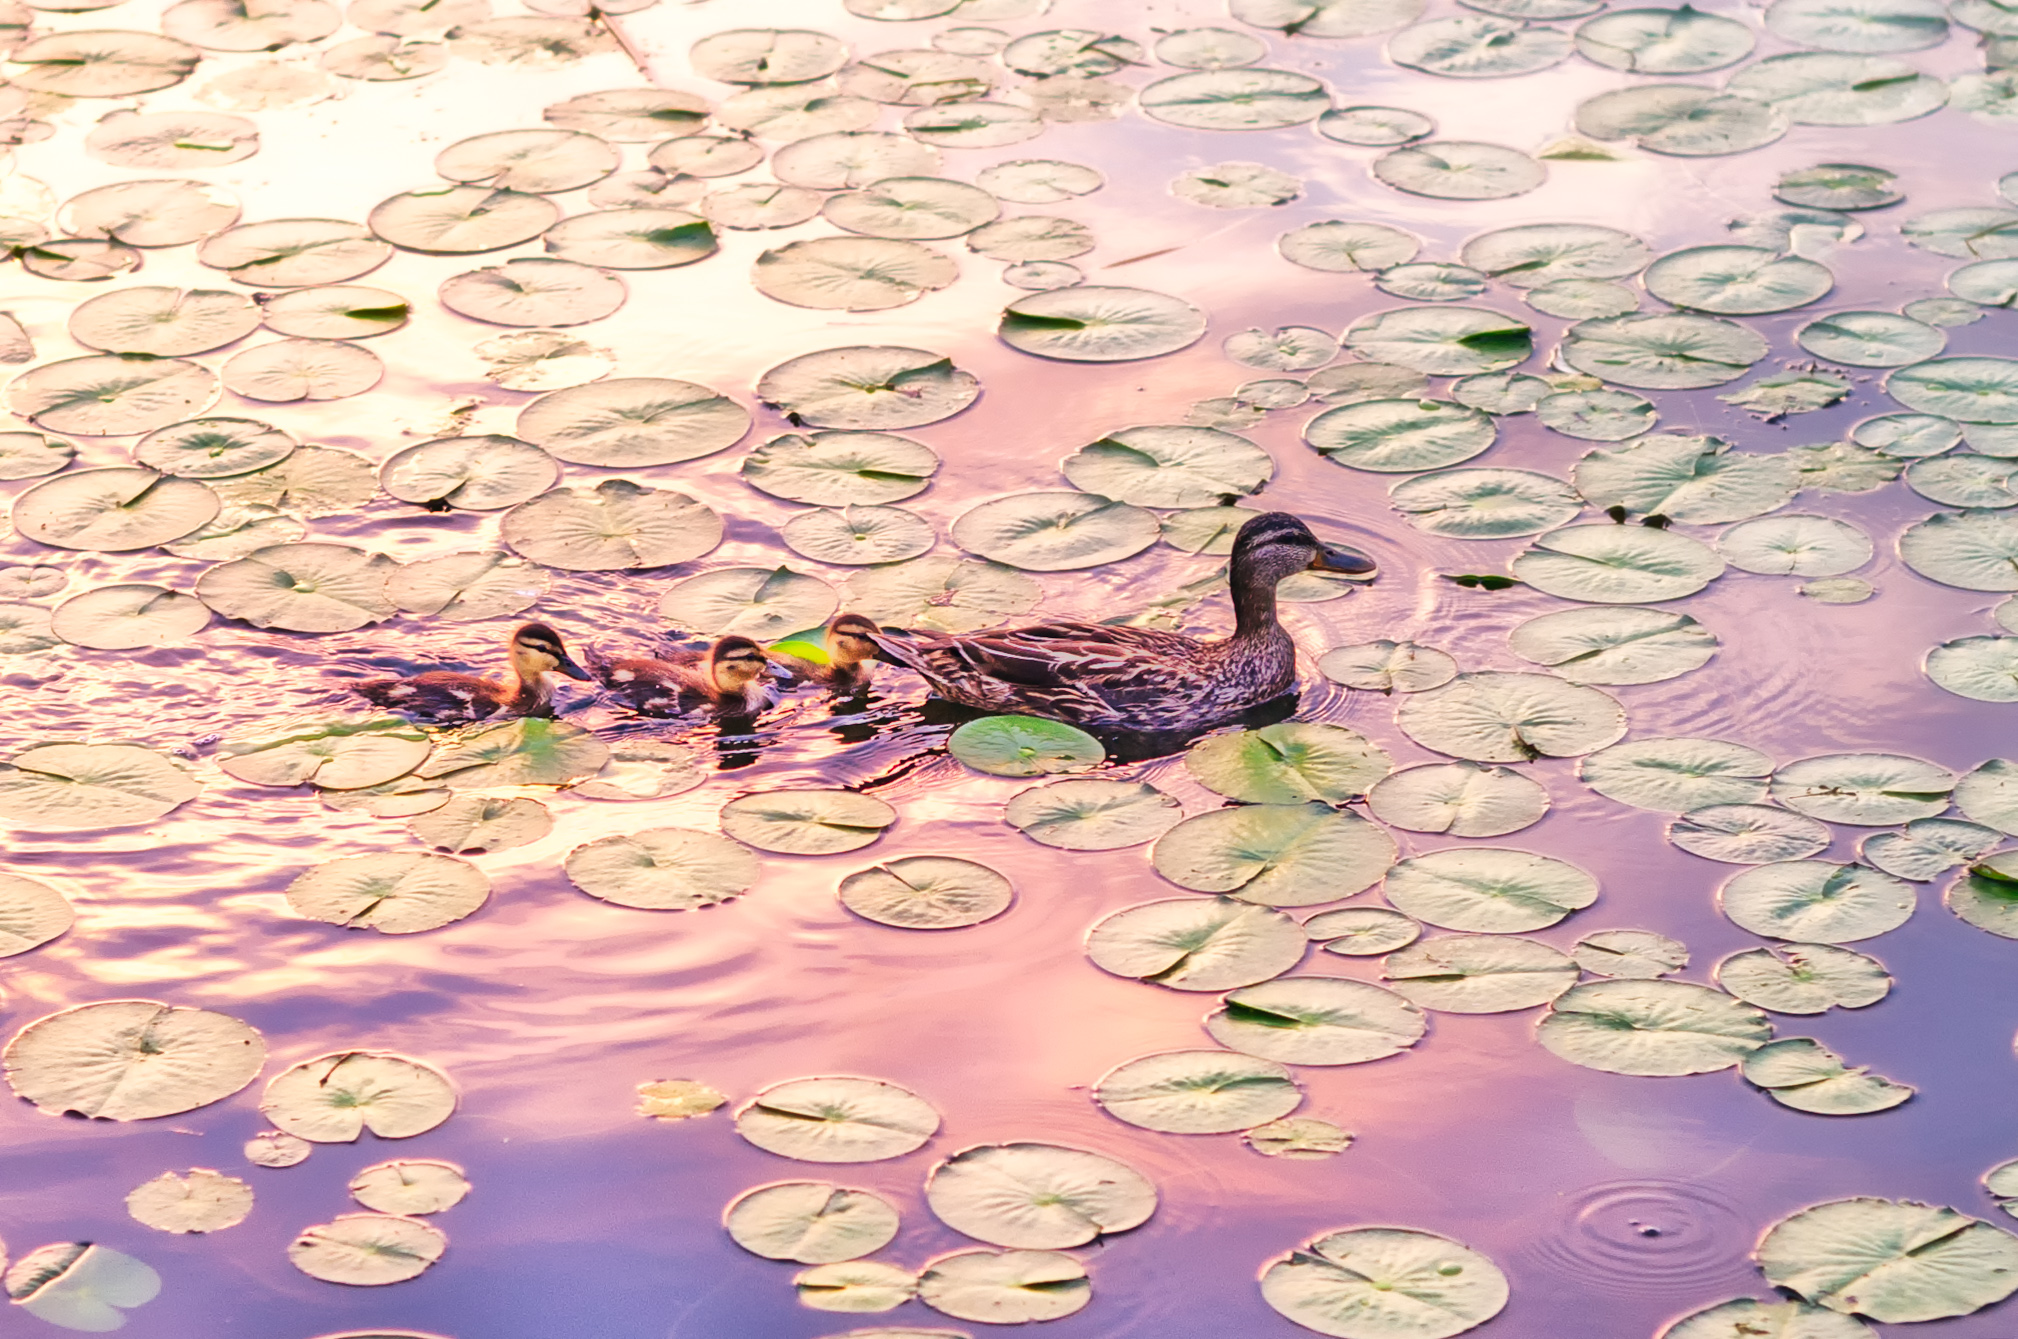 Mallard Family in Lily Pads (19026780264)